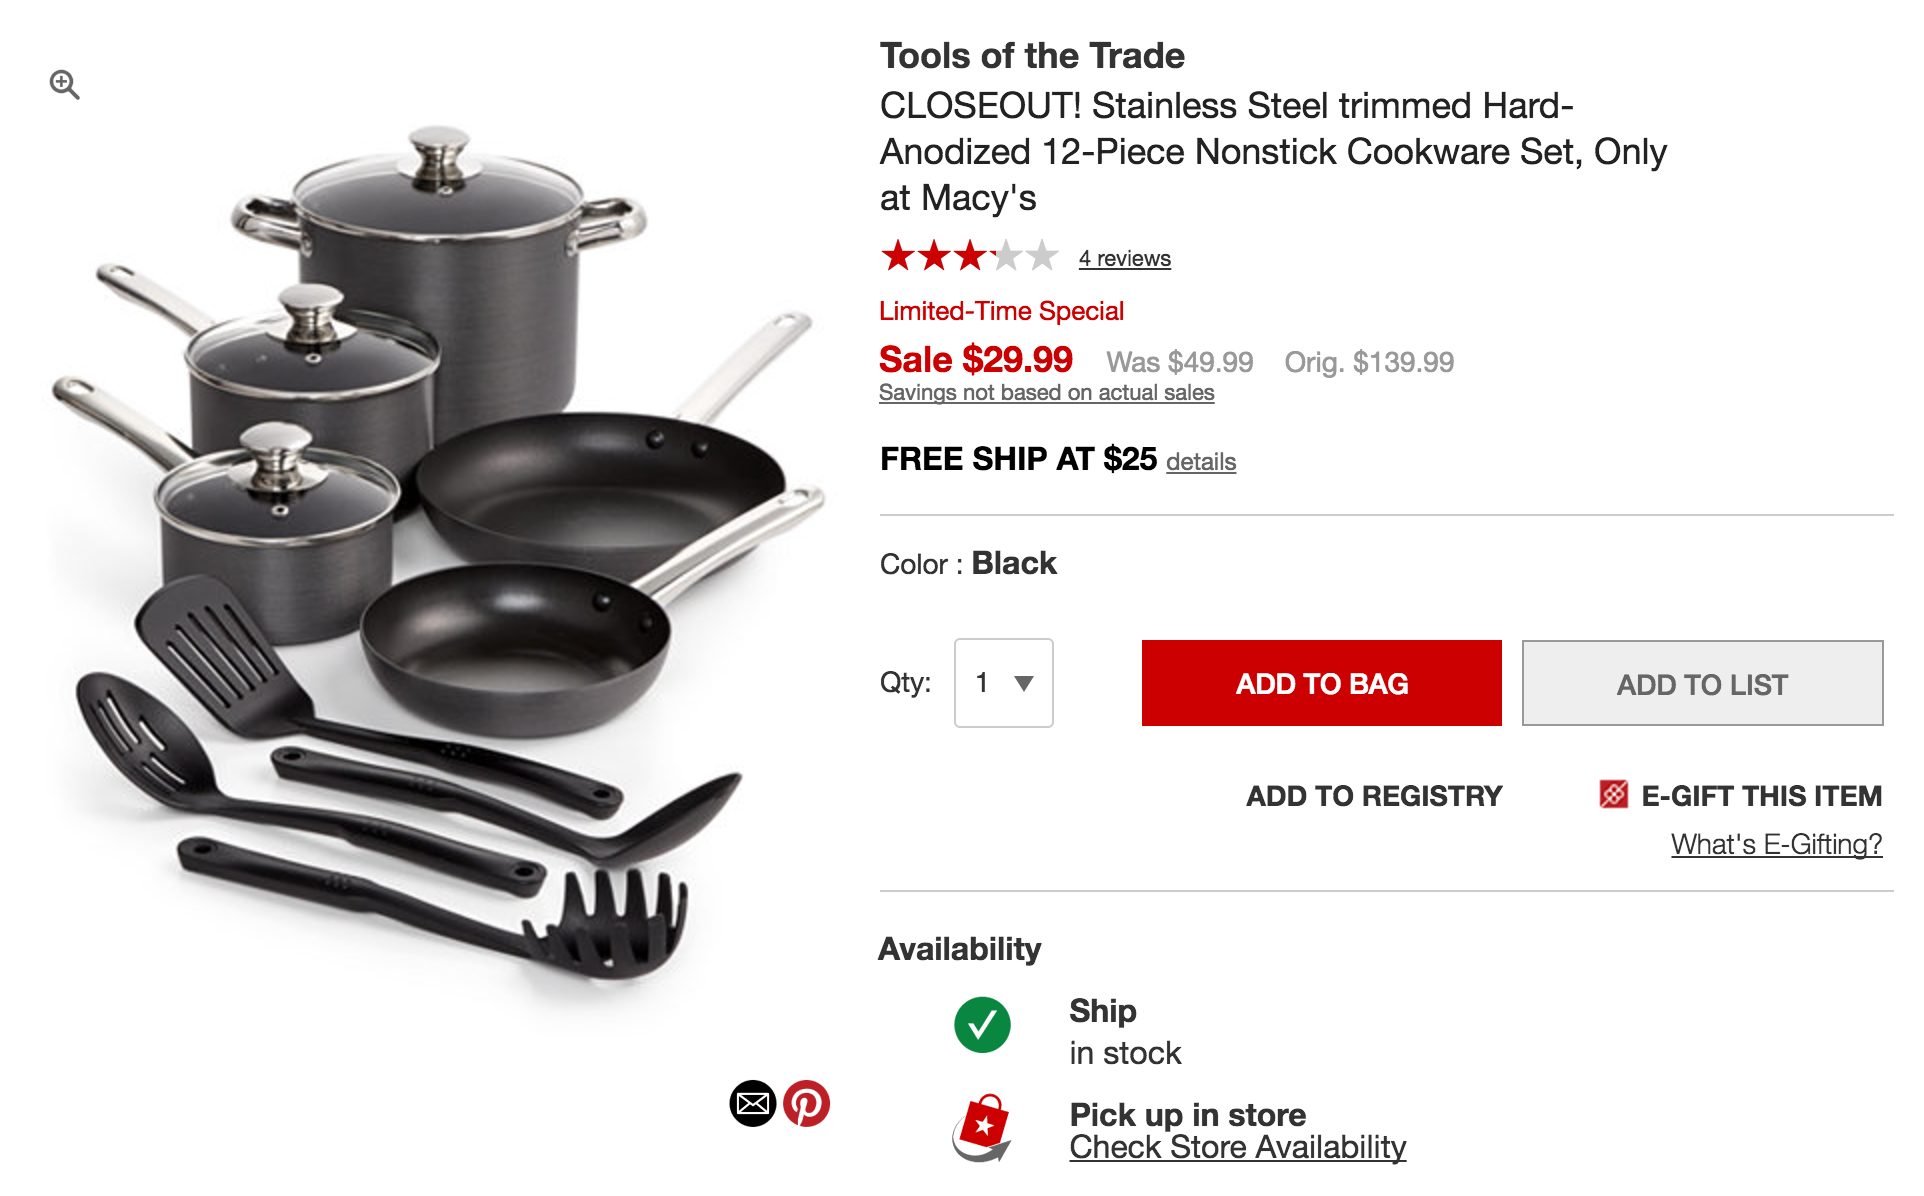 tools-of-the-trade-stainless-steel-trimmed-hard-anodized-12-piece-nonstick-cookware-set-2